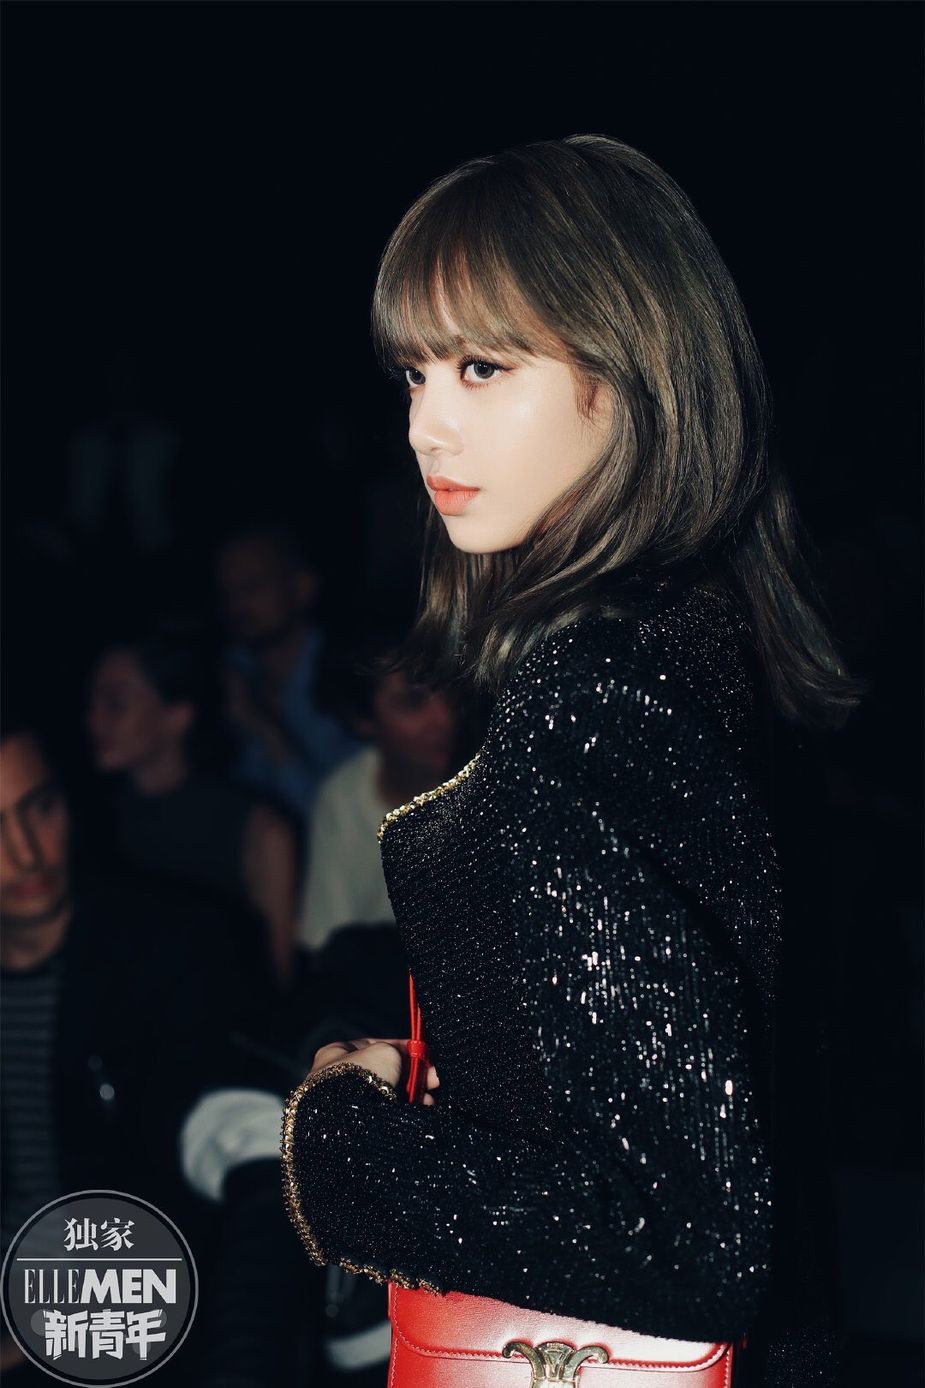 Here's When BLACKPINK's Lisa Was At Her Prettiest, According To Koreans ...